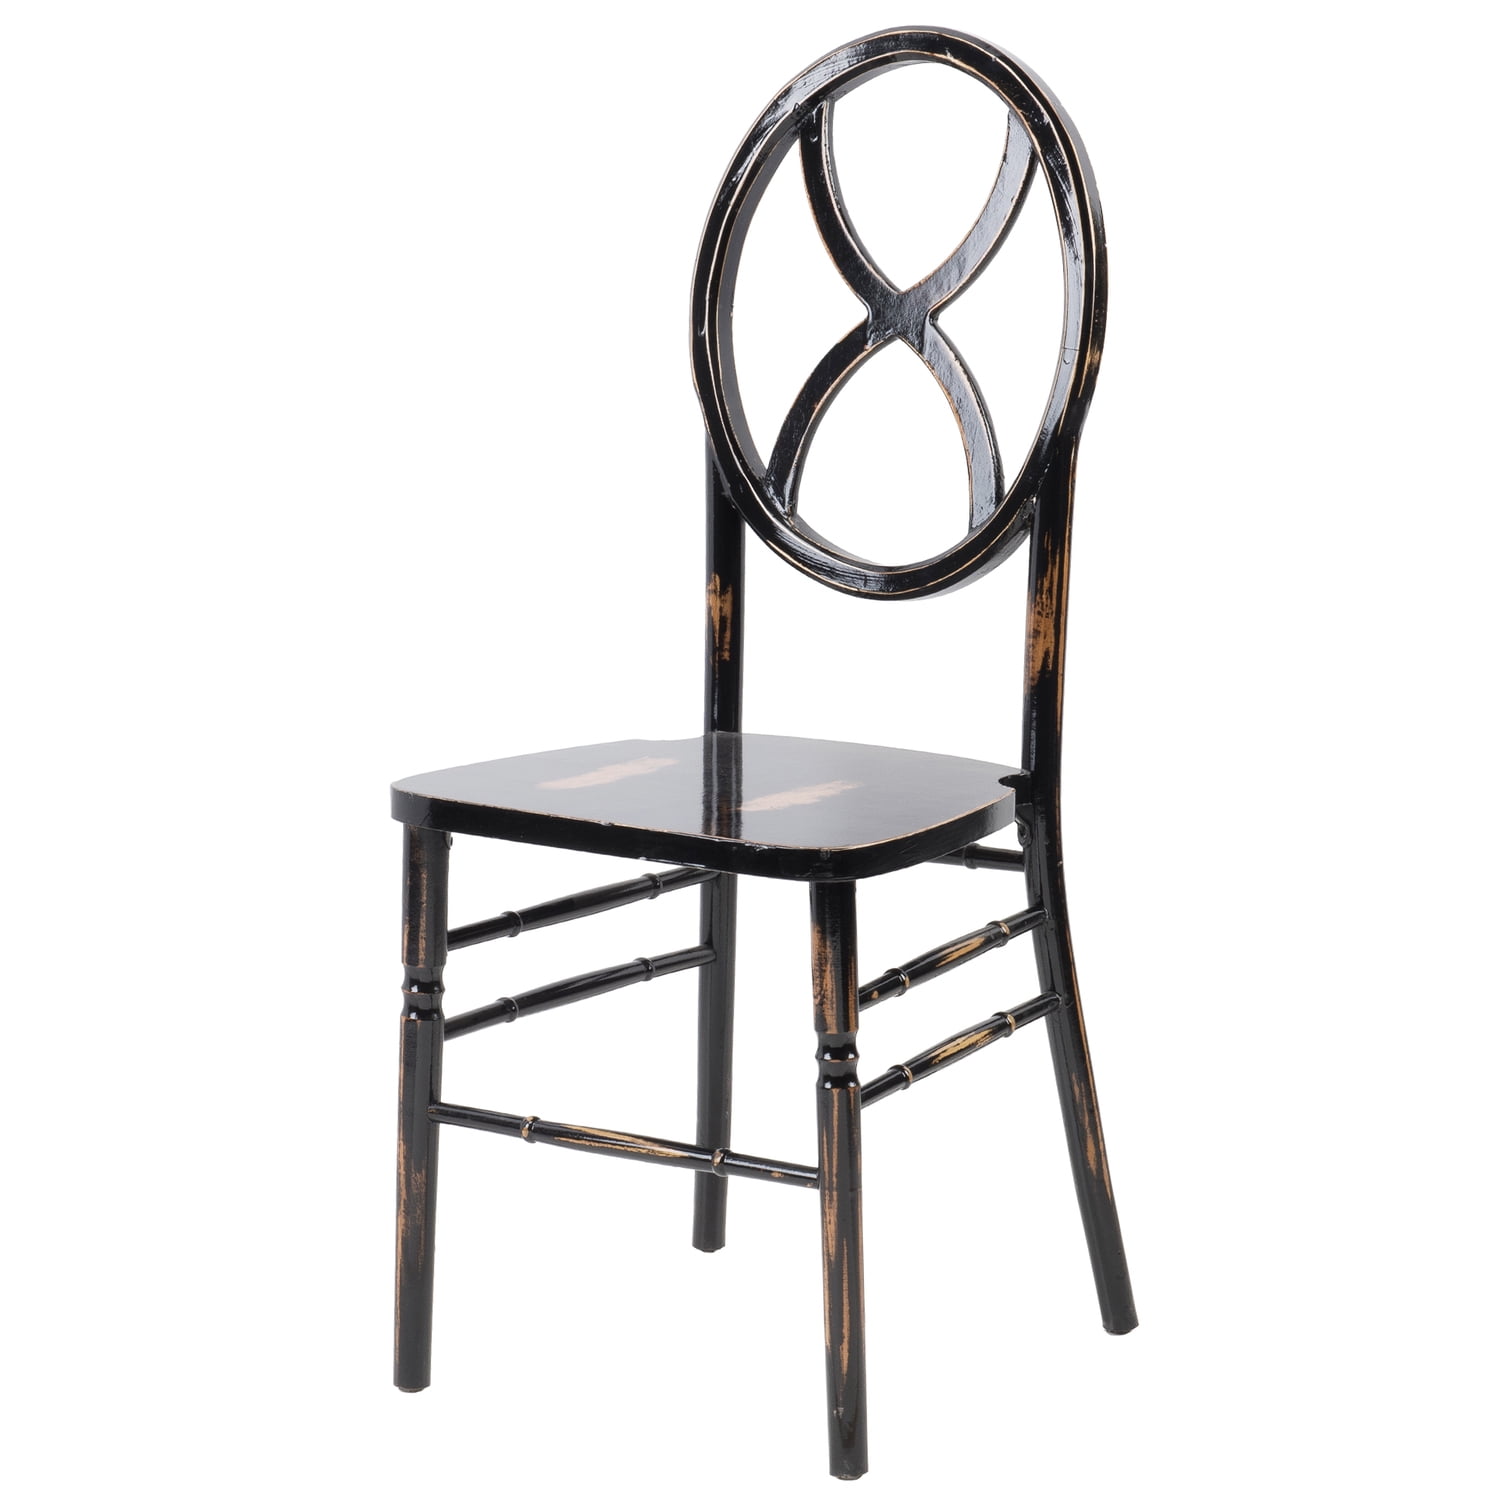 W-415-vr-sandglass-lwb Veronique Series Stackable Sand Glass Wood Dining Chair - Lime Black Wash - 38.75 In.